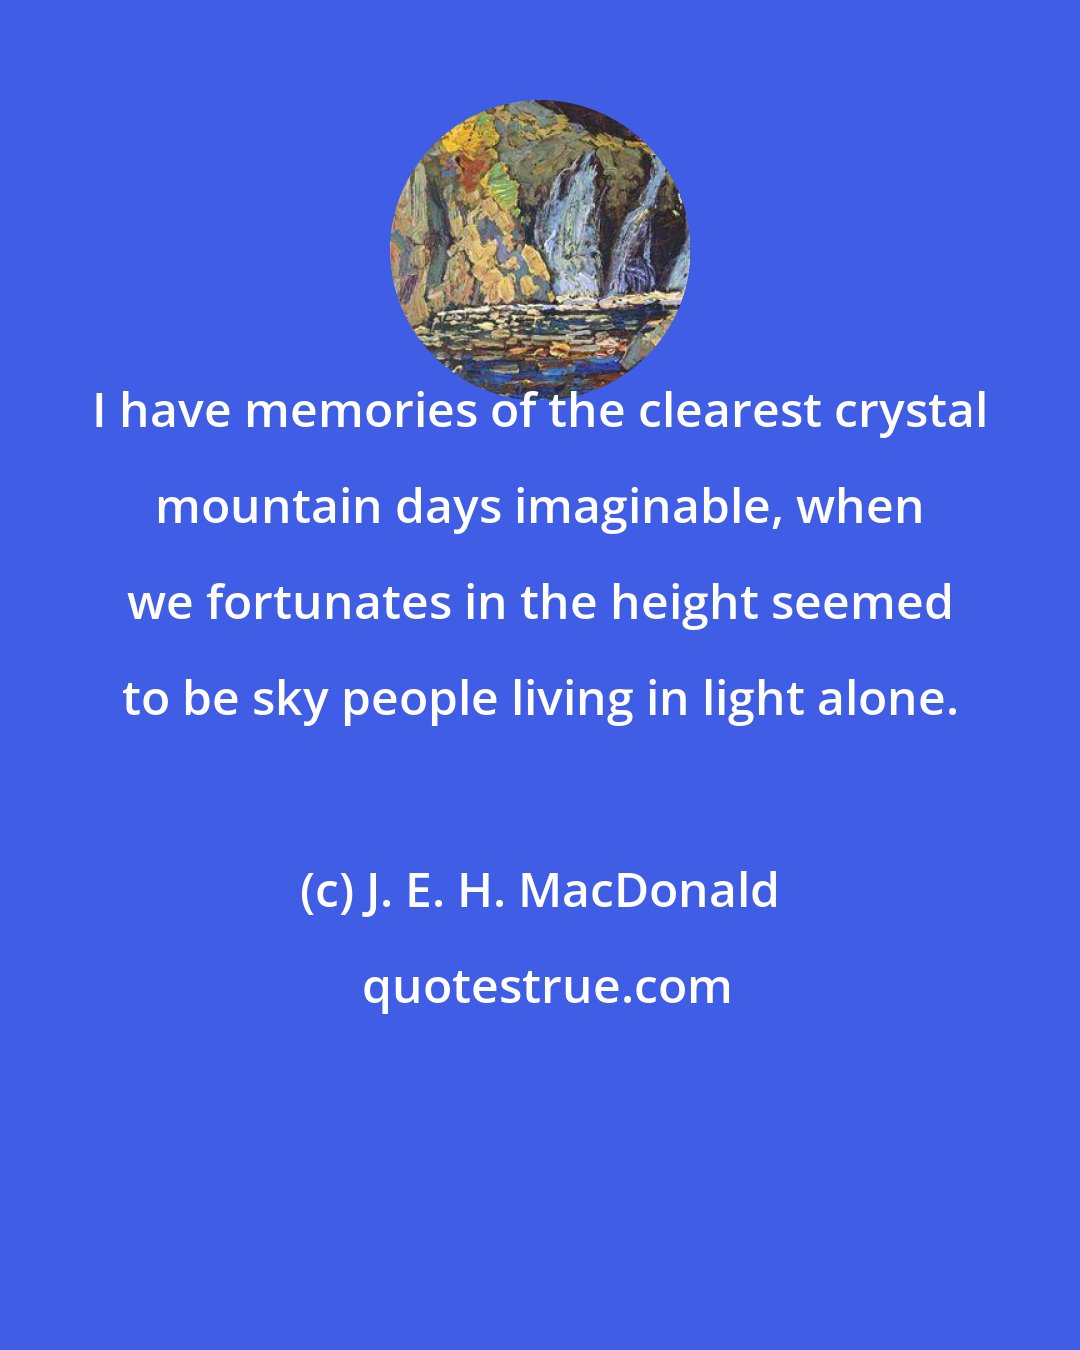 J. E. H. MacDonald: I have memories of the clearest crystal mountain days imaginable, when we fortunates in the height seemed to be sky people living in light alone.